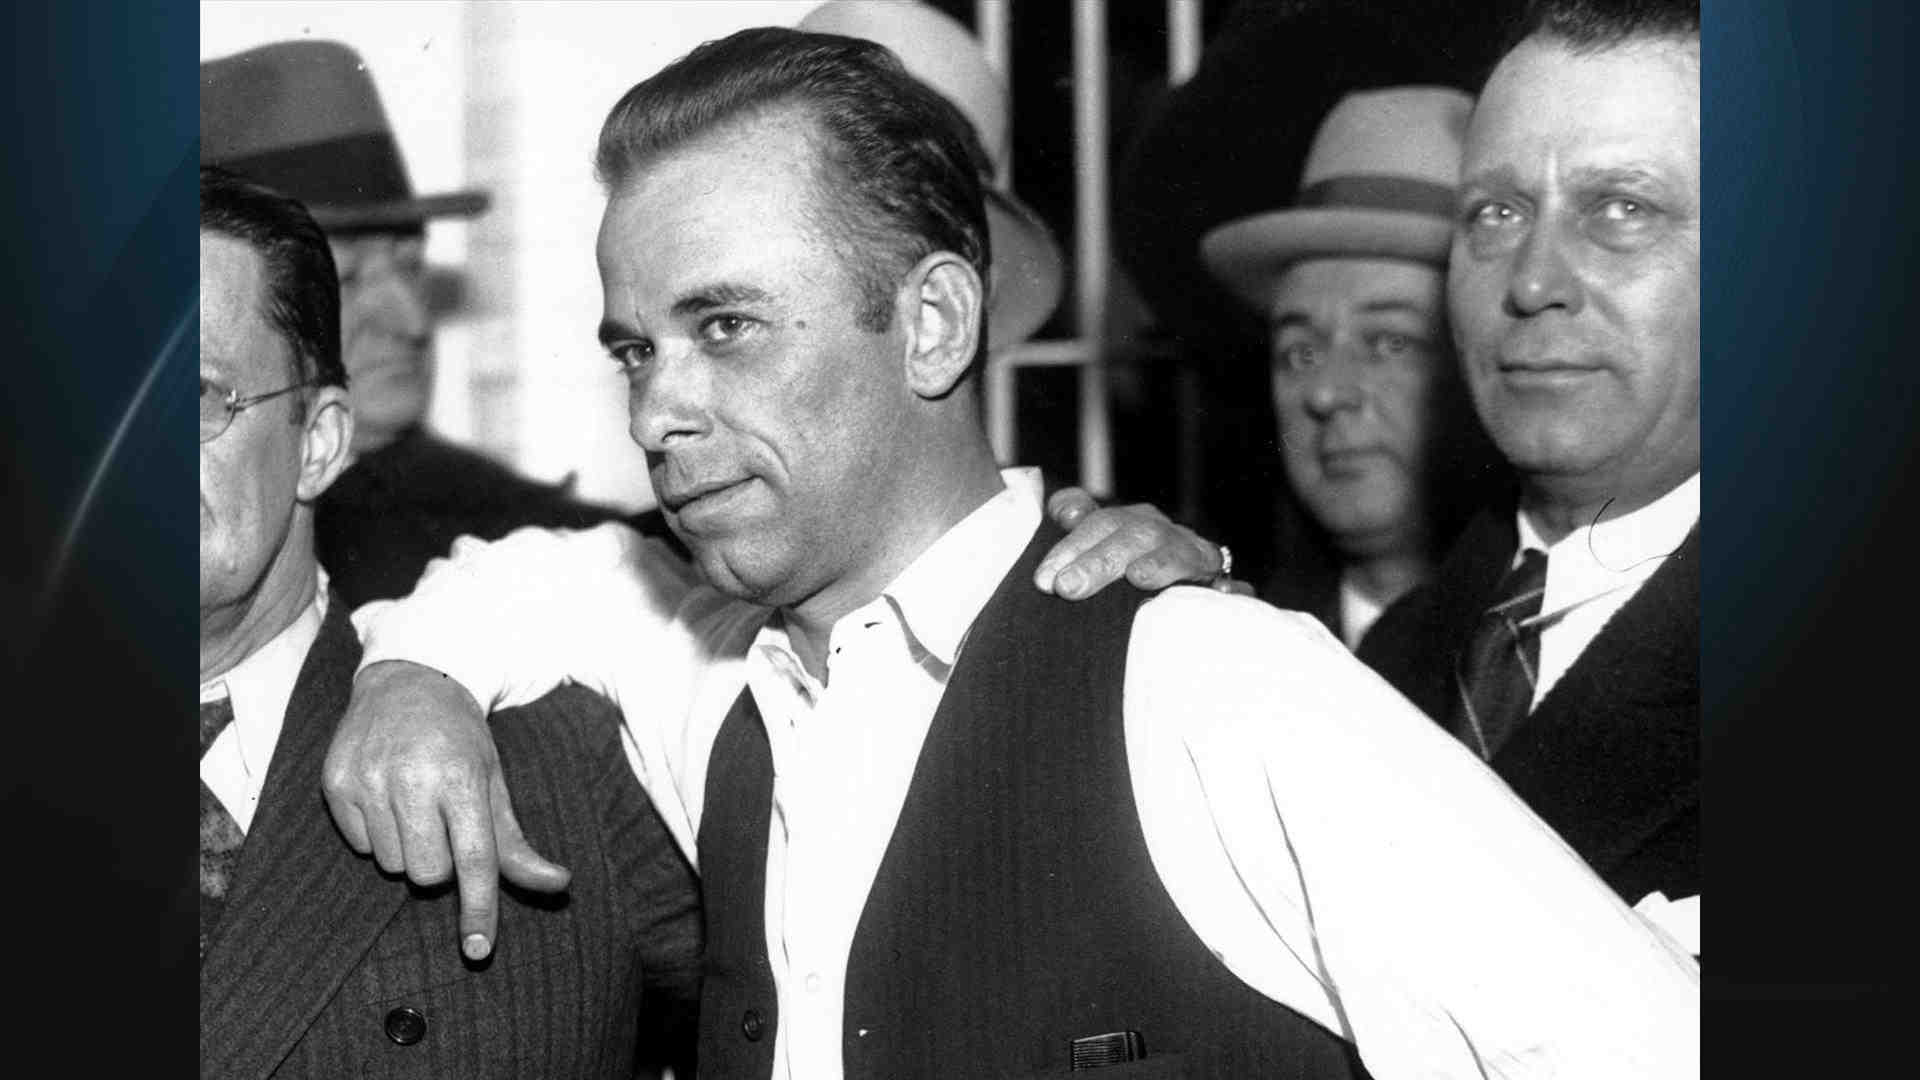 Body of 1930s gangster, Mason City bank robber John Dillinger to be exhumed